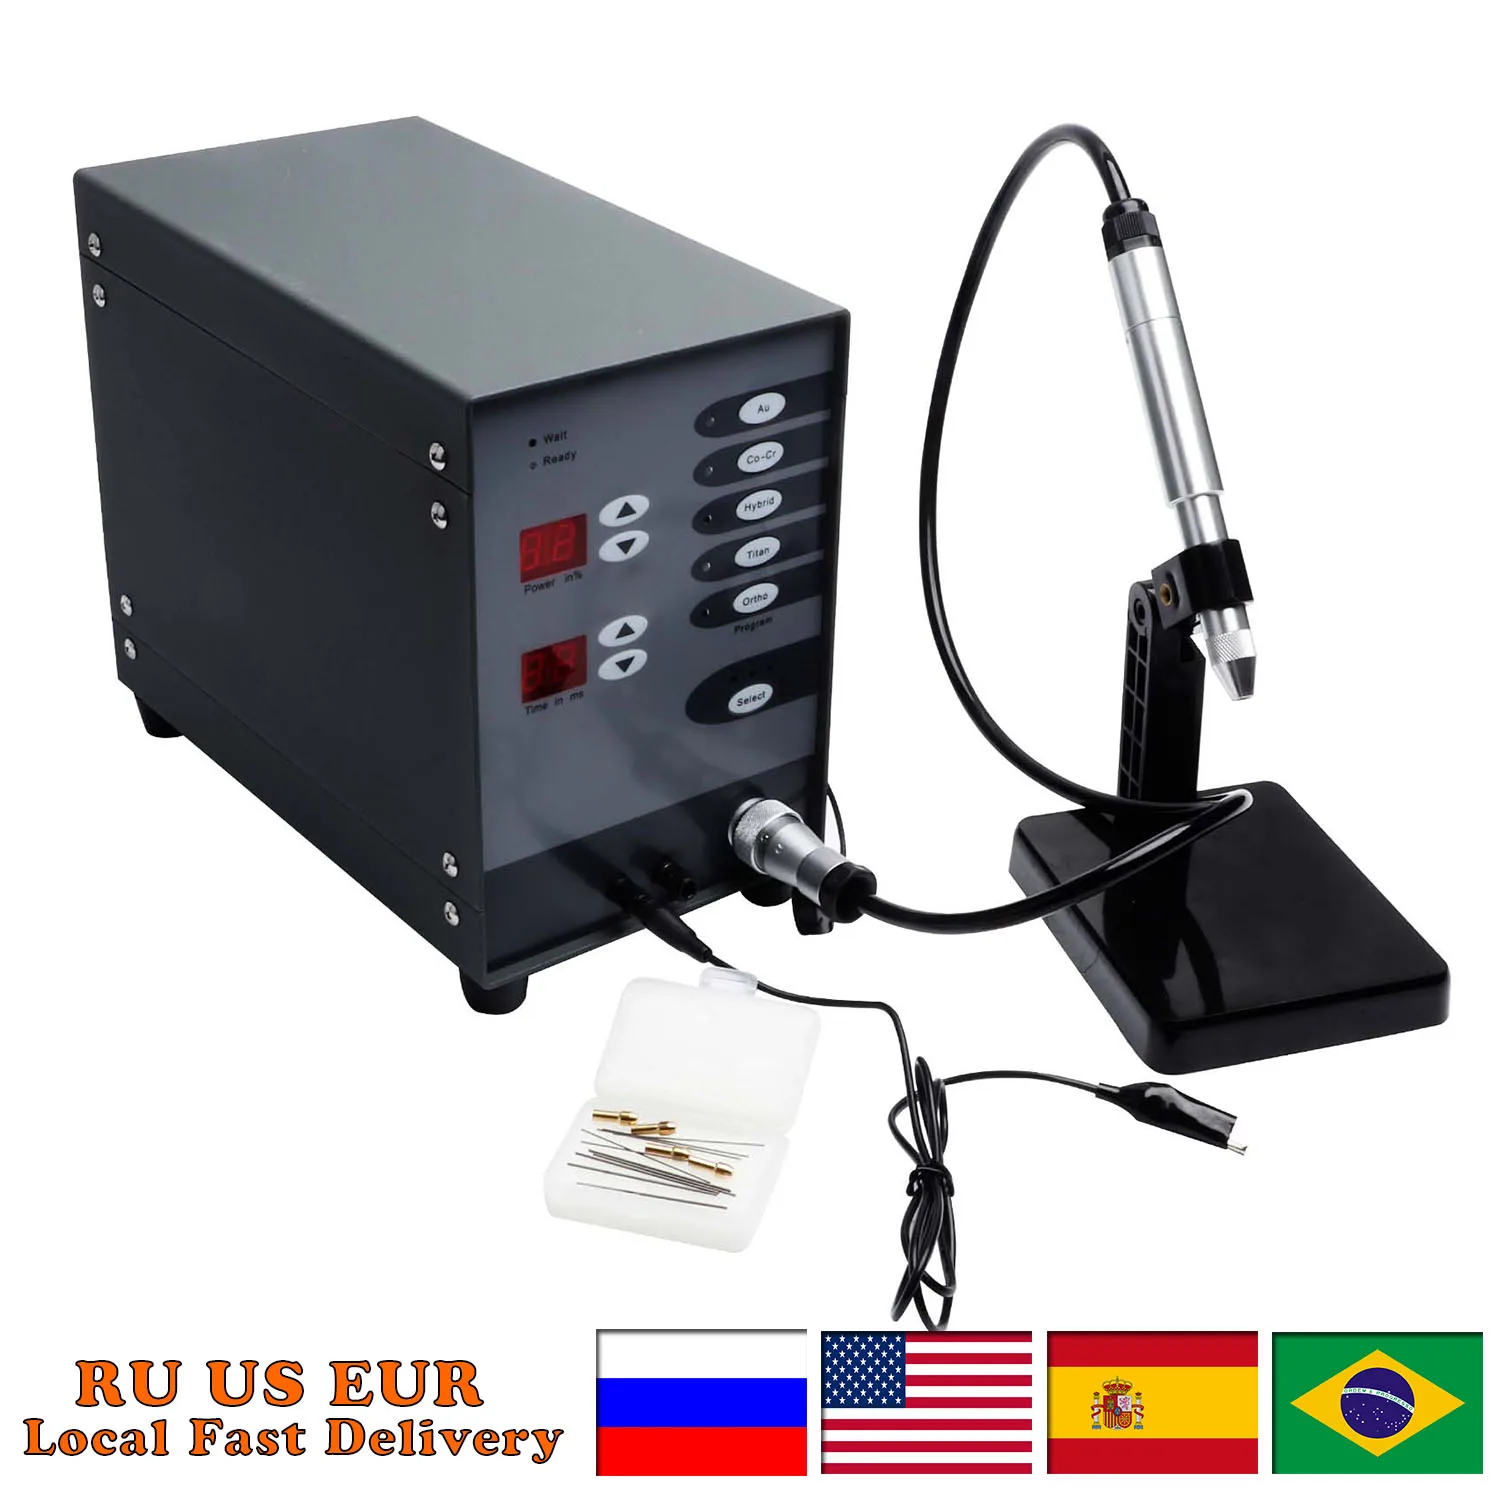 High Power Automatic Spot Welding Machine Dental Stainless Steel Numerical Control Touch Pulse Argon Arc for Soldering Jewelry